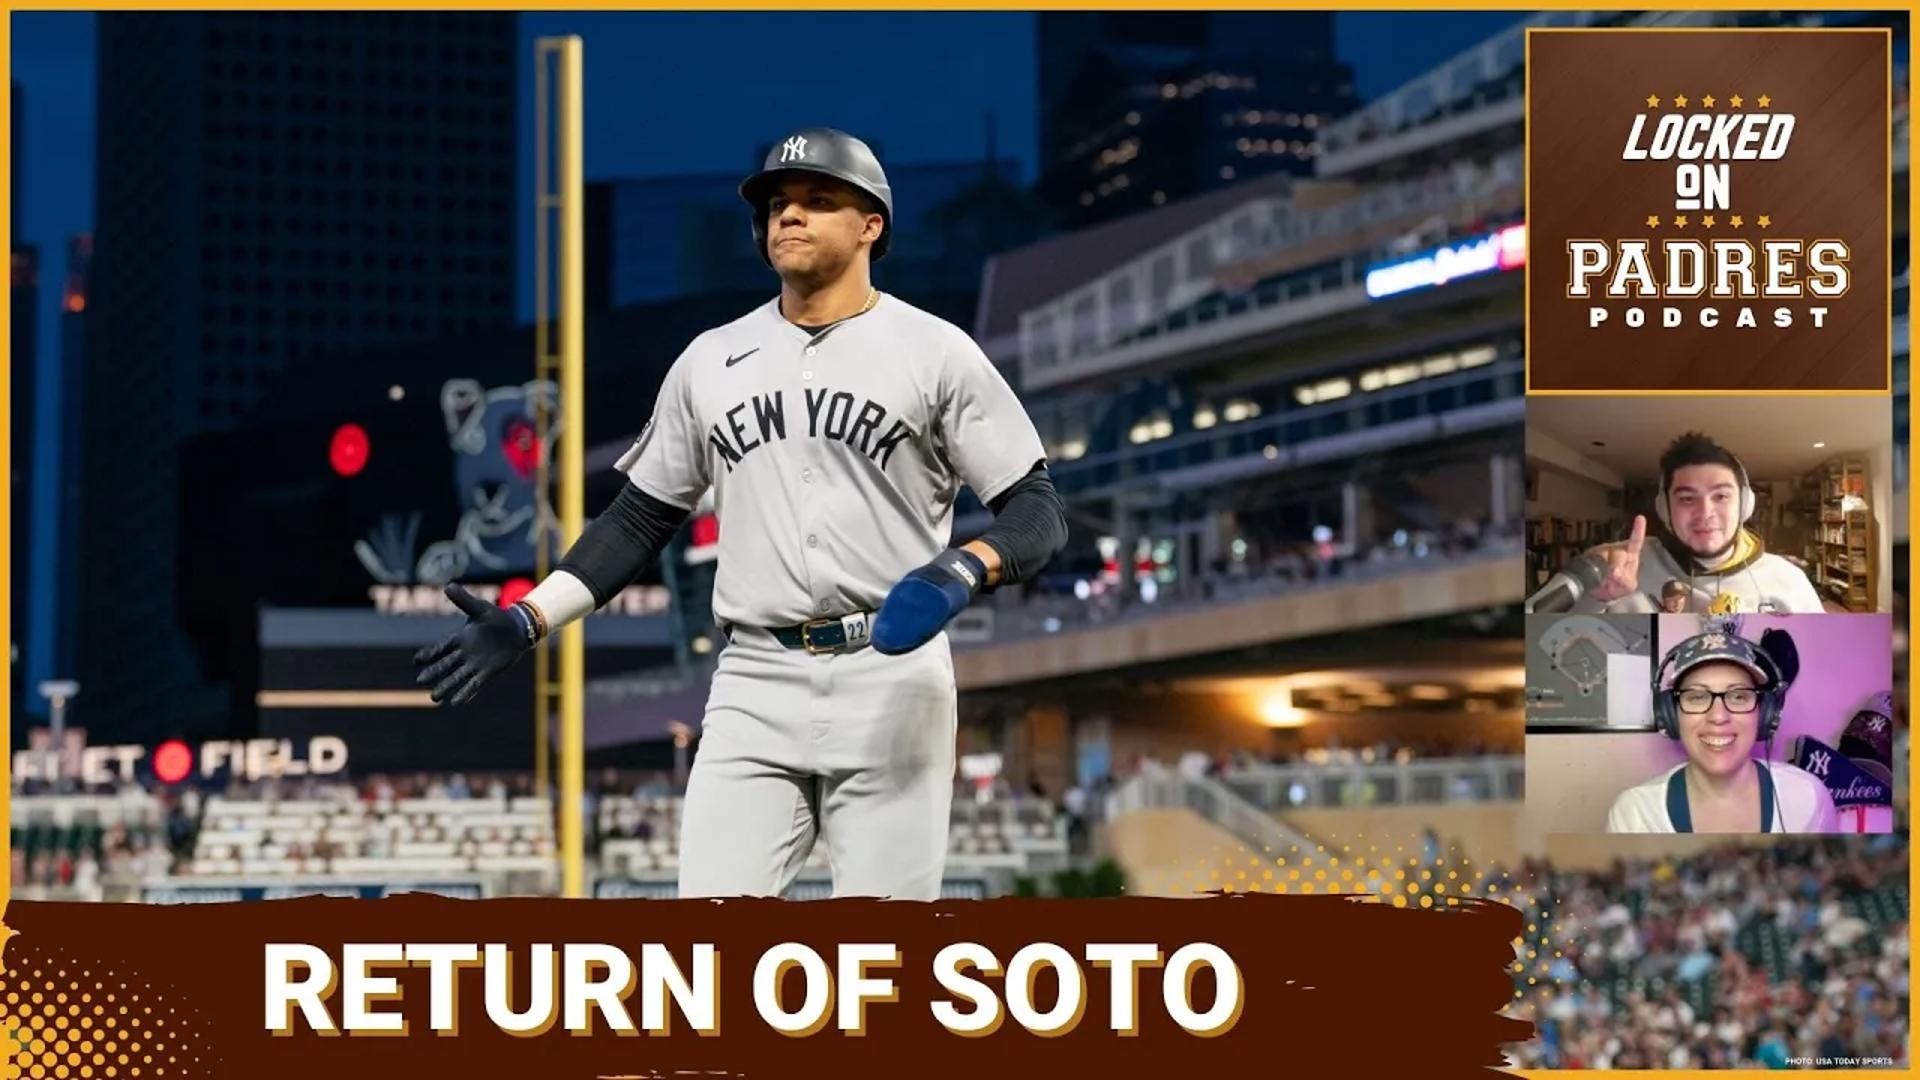 On today's episode, Javier is joined by Stacey Gotsulias and Brian McKeon (hosts of Locked On Yankees) to preview this HUGE series between the Padres and Yankees